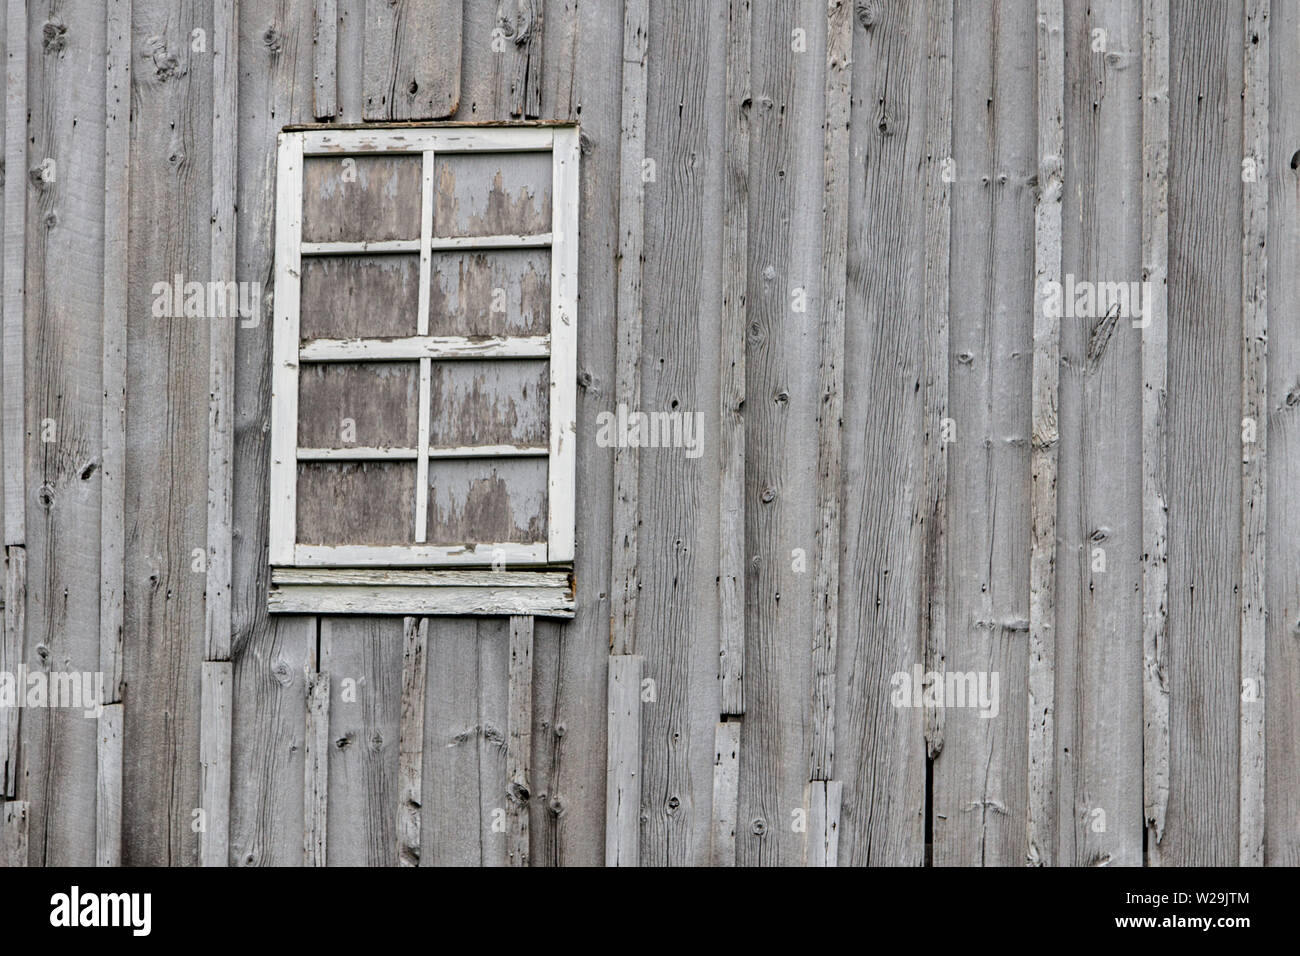 Textured Barn Wall Background. Weathered grey barn wall exterior with boarded up window. Stock Photo